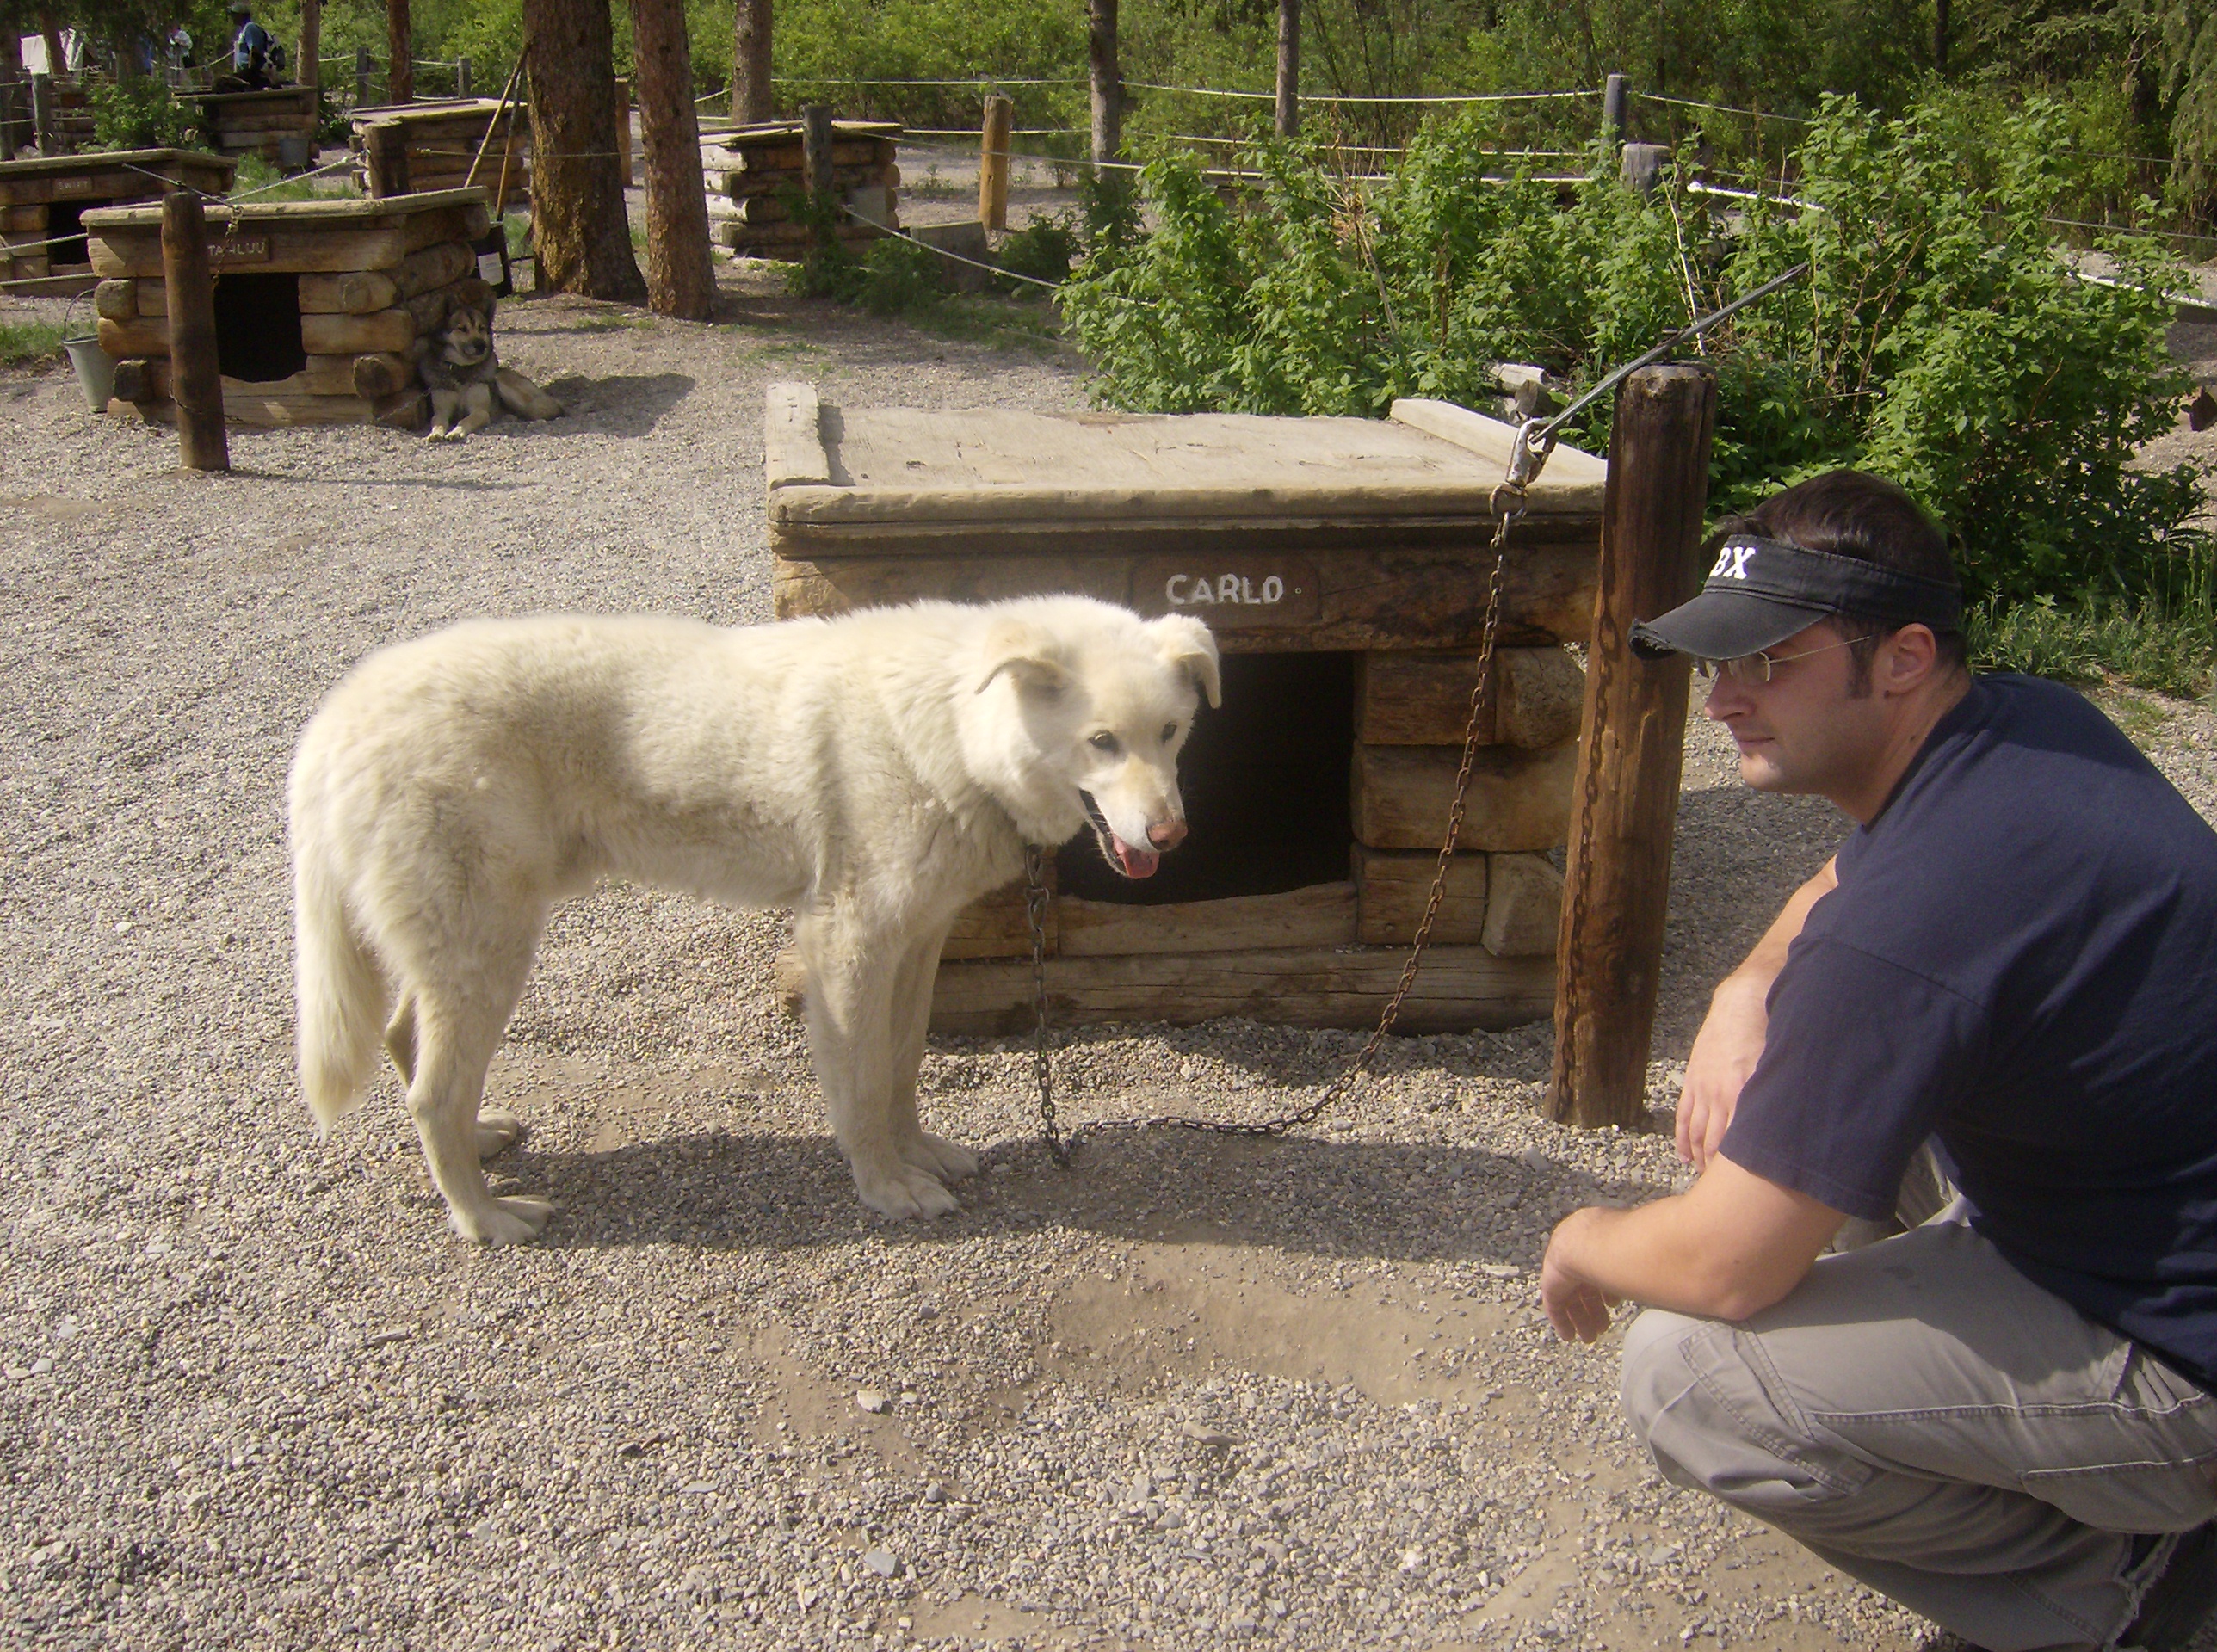 Paying my respects to the sled dogs in Alaska.